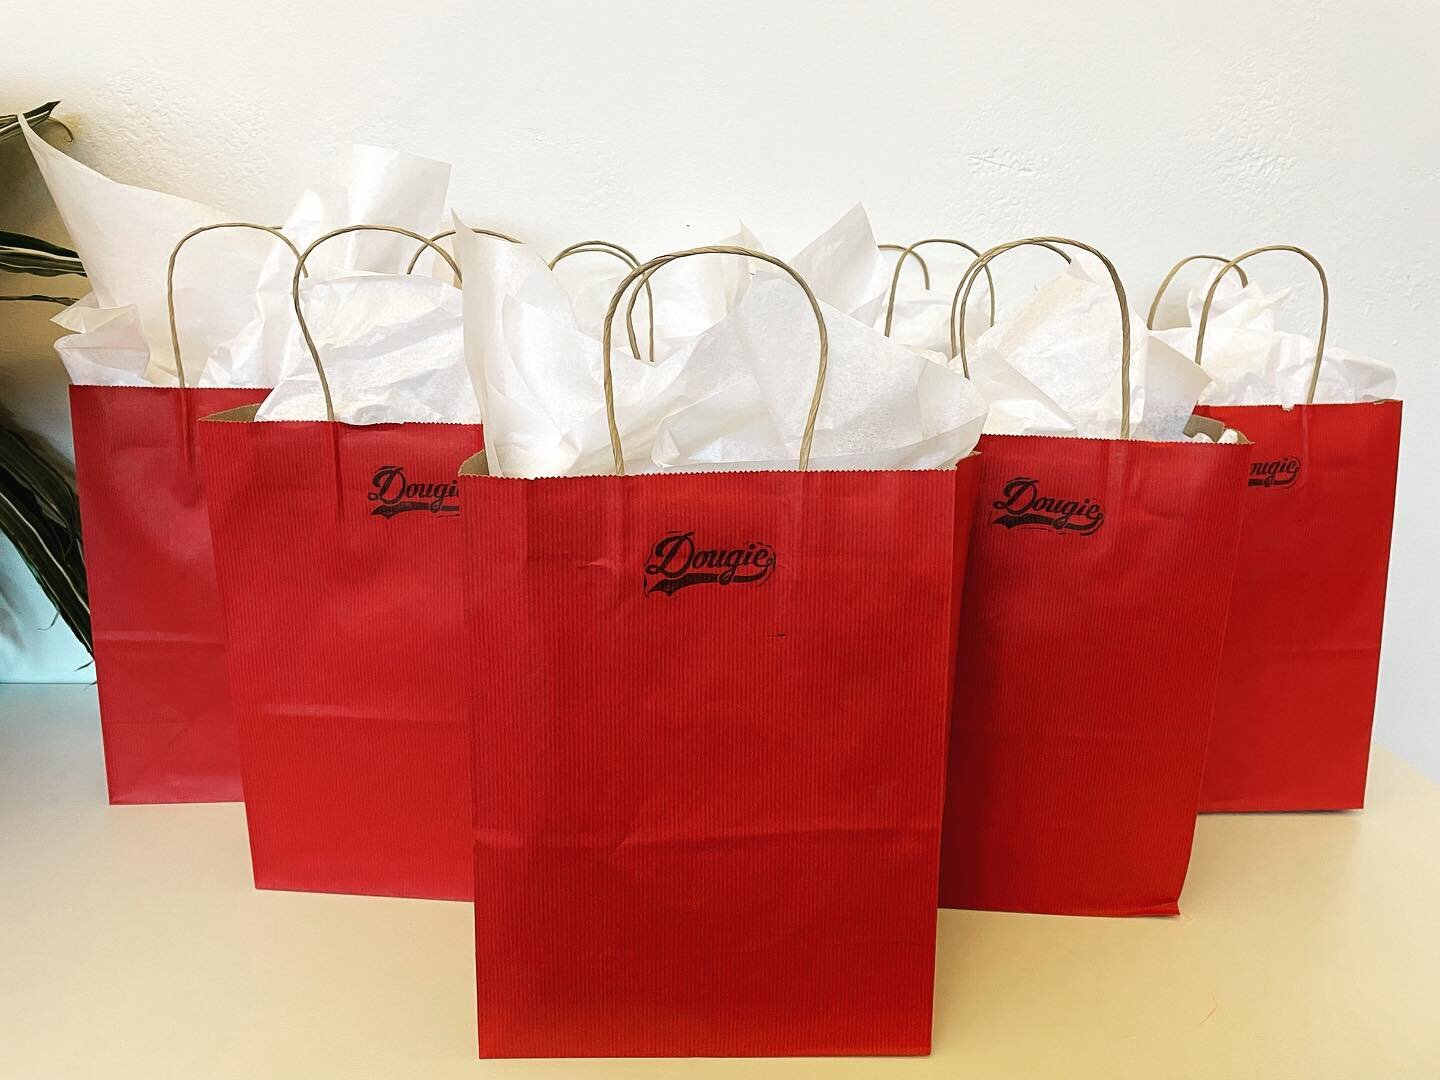 Don&rsquo;t forget to stop by the Leasing Office this week for your Dougie swag bag while supplies last! Can confirm: They are stocked with sweet surprises ☕️ 👀